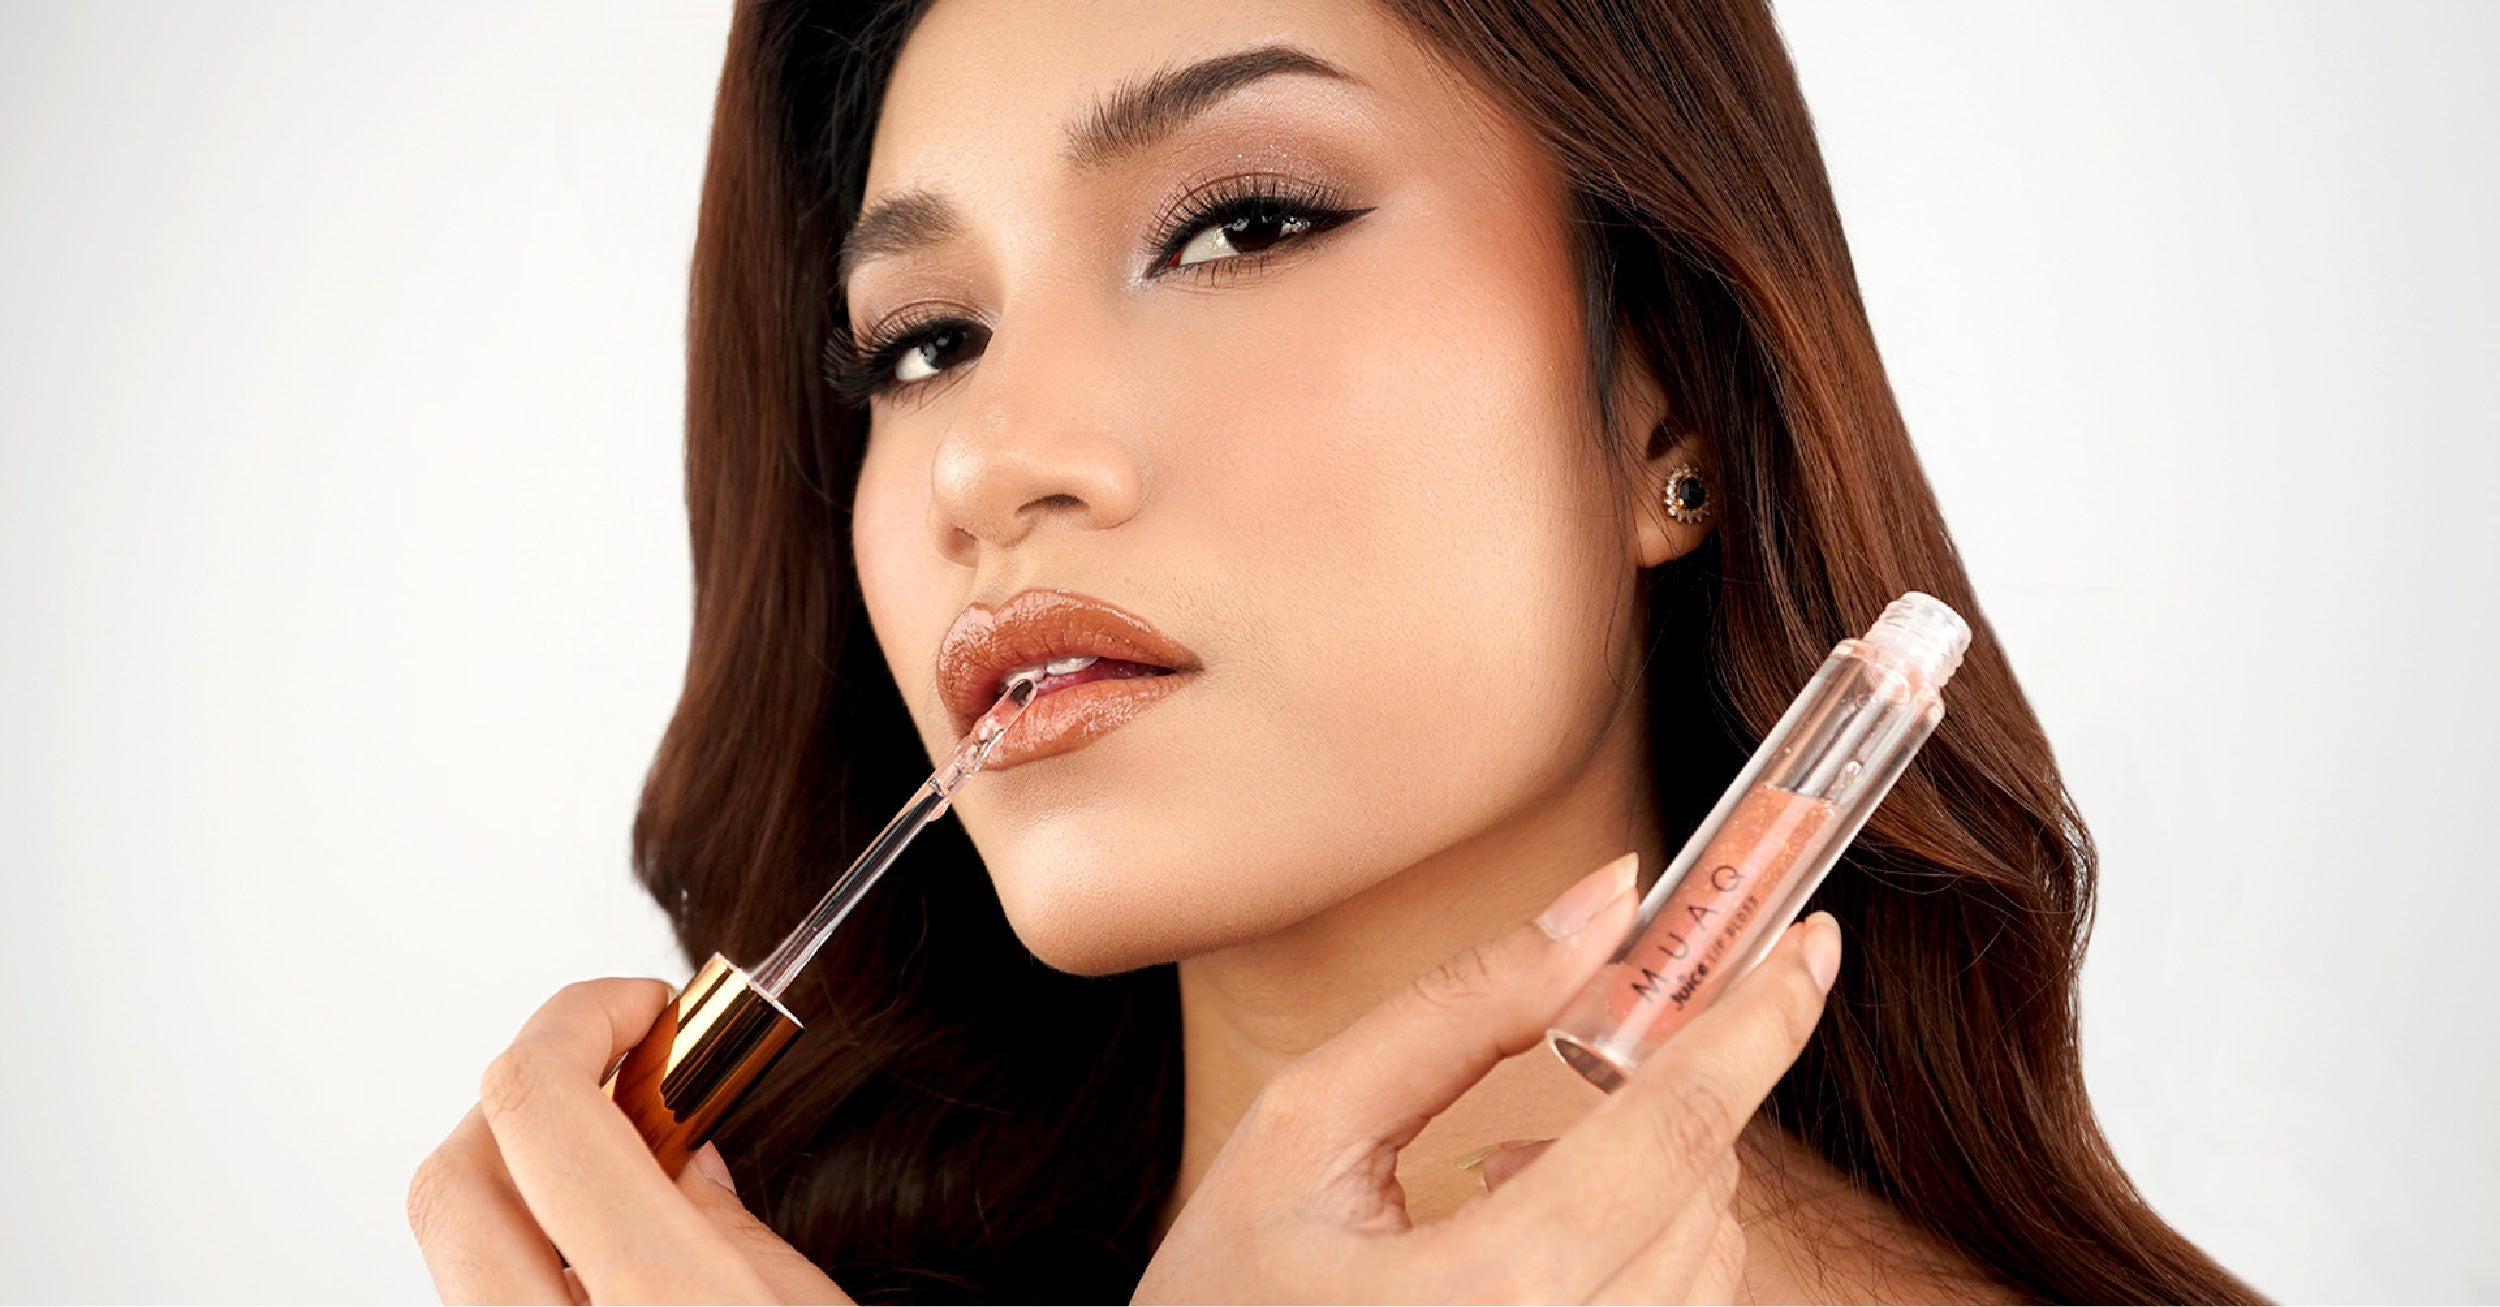 ALL-DAY GLAM: TIPS AND TRICKS FOR LONG-LASTING LIP GLOSS